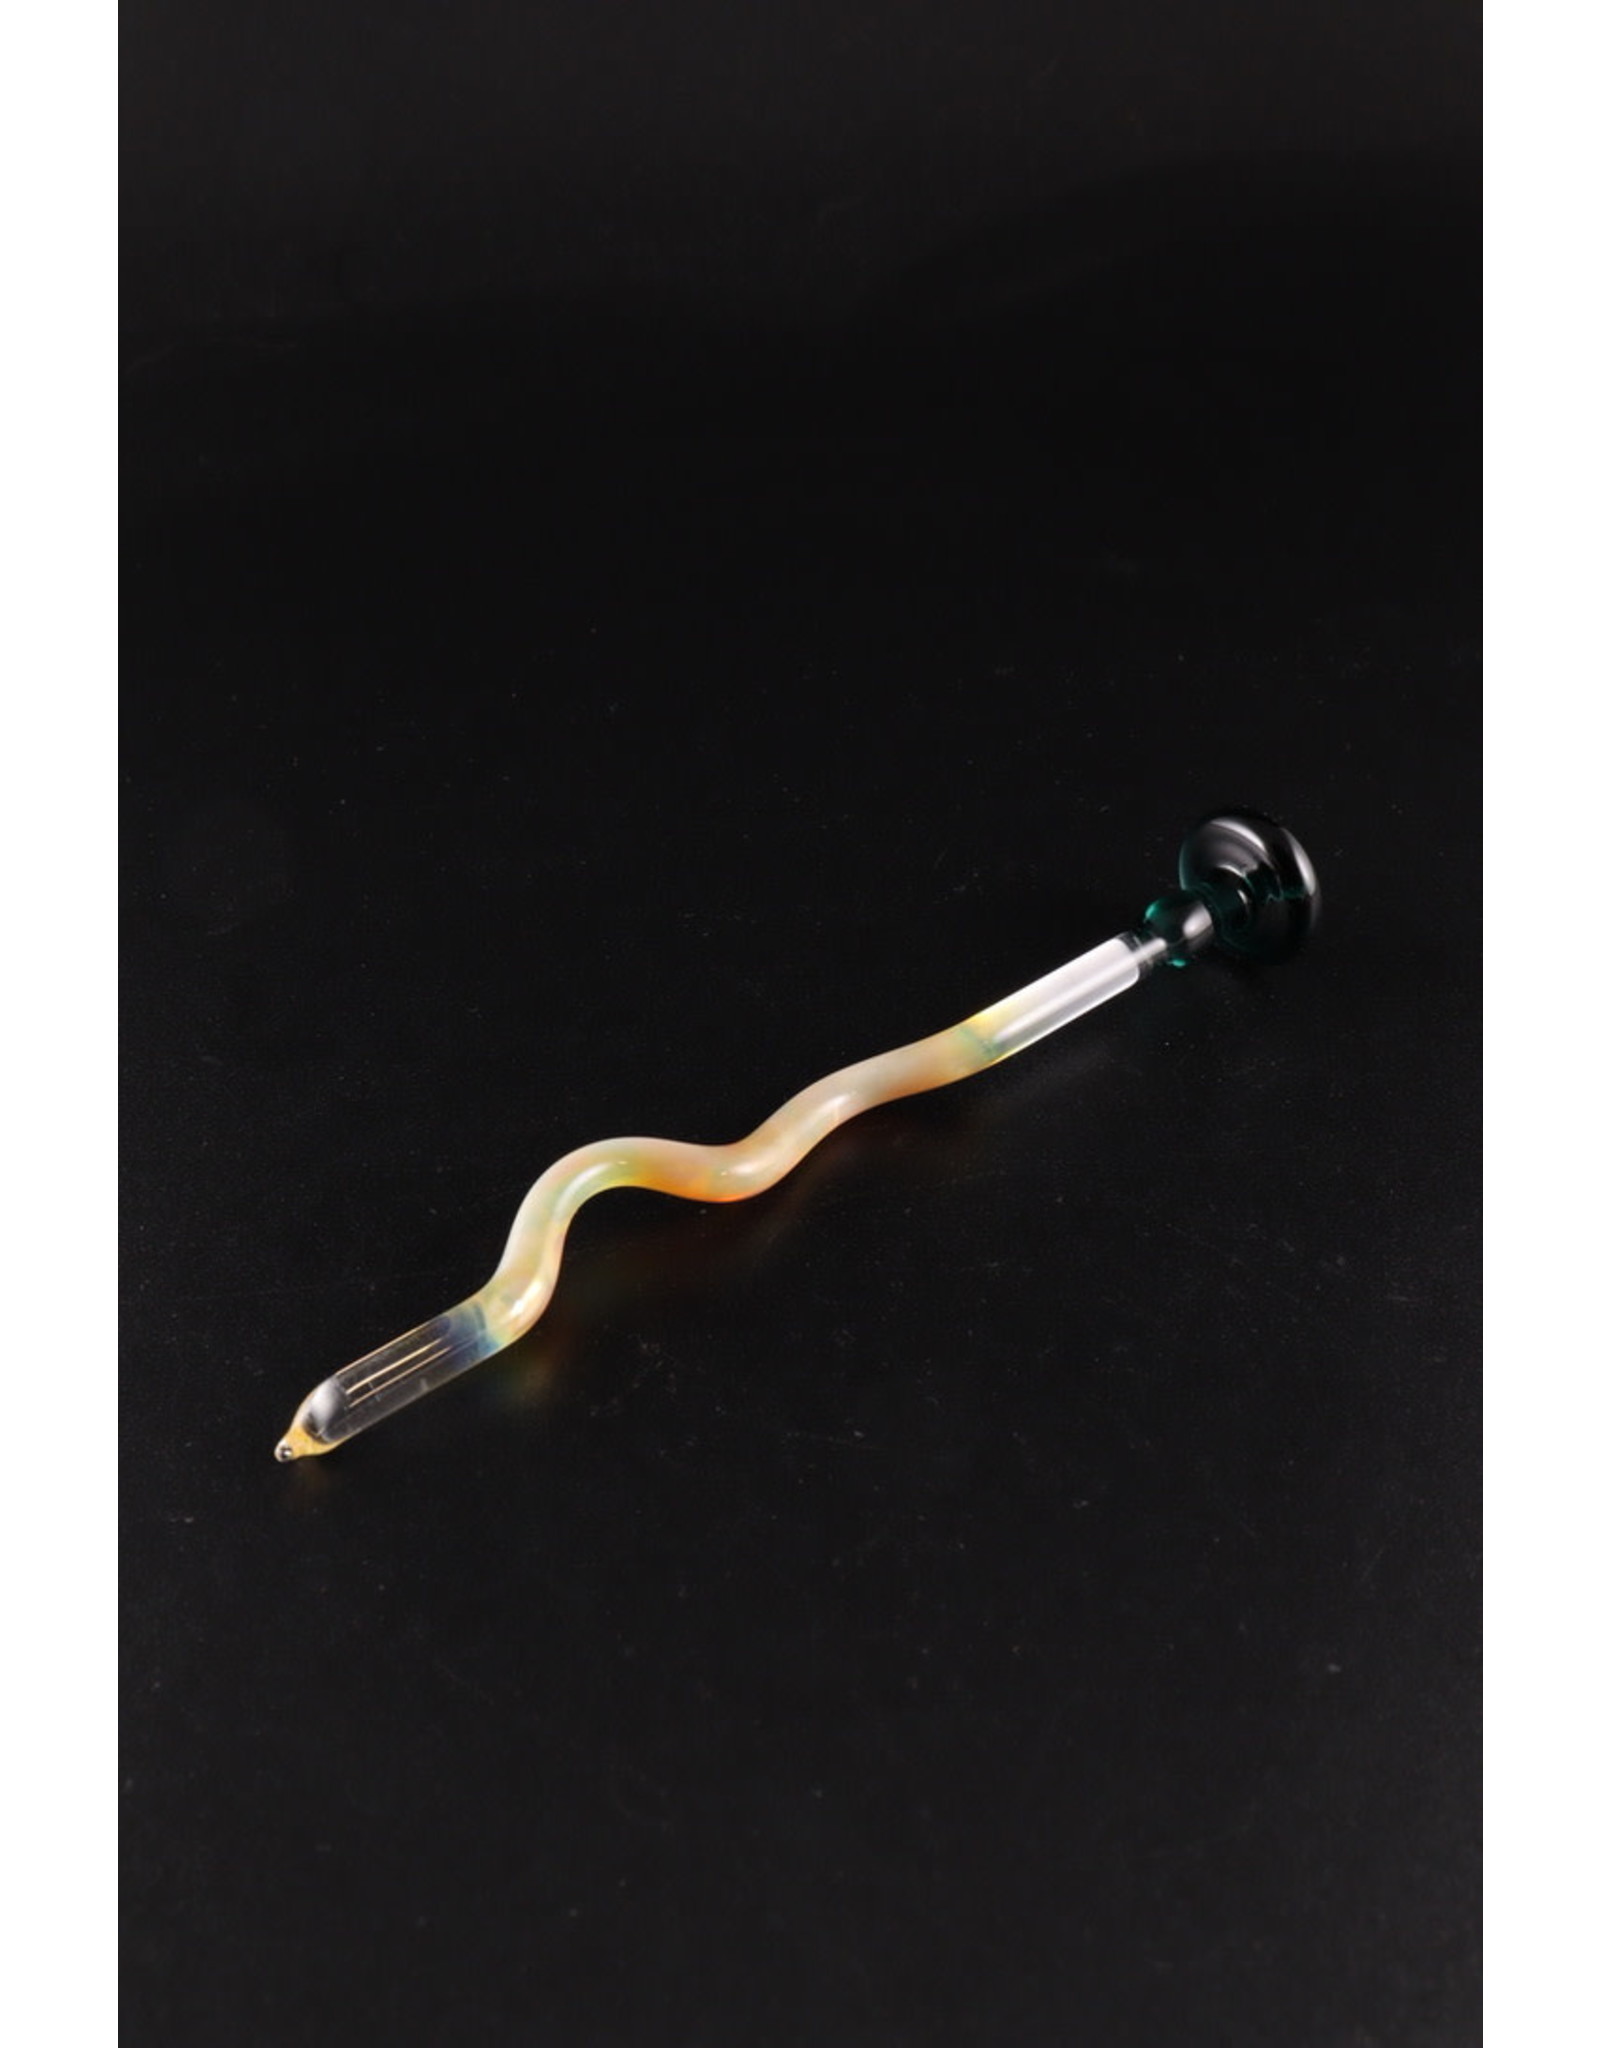 Lil Ben Glass Clear Fumed Bent Dabber Tool w/ Color End Carb Cap